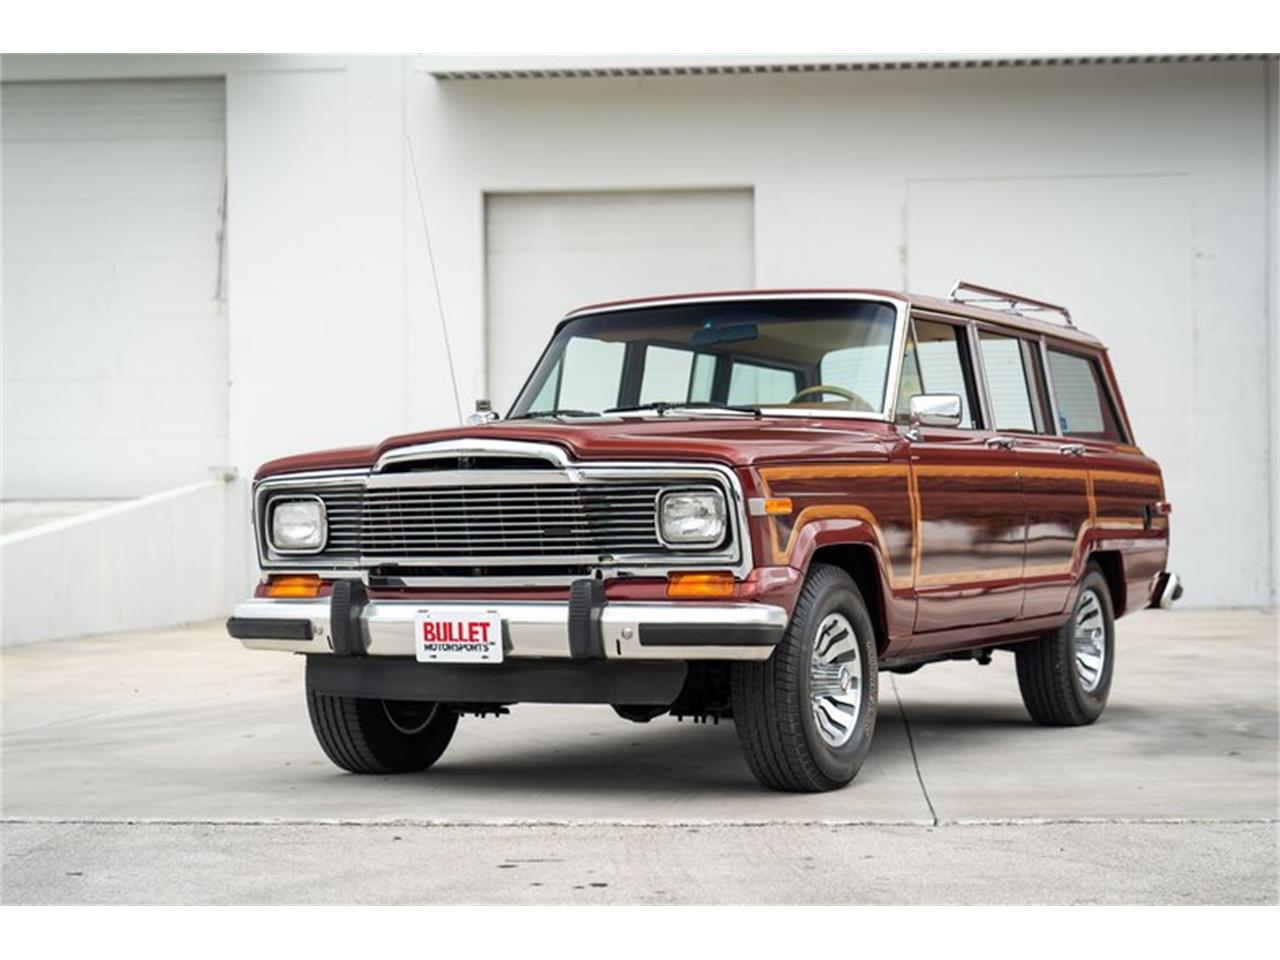 For Sale: 1984 Jeep Grand Wagoneer in Fort Lauderdale, Florida for sale in Fort Lauderdale, FL